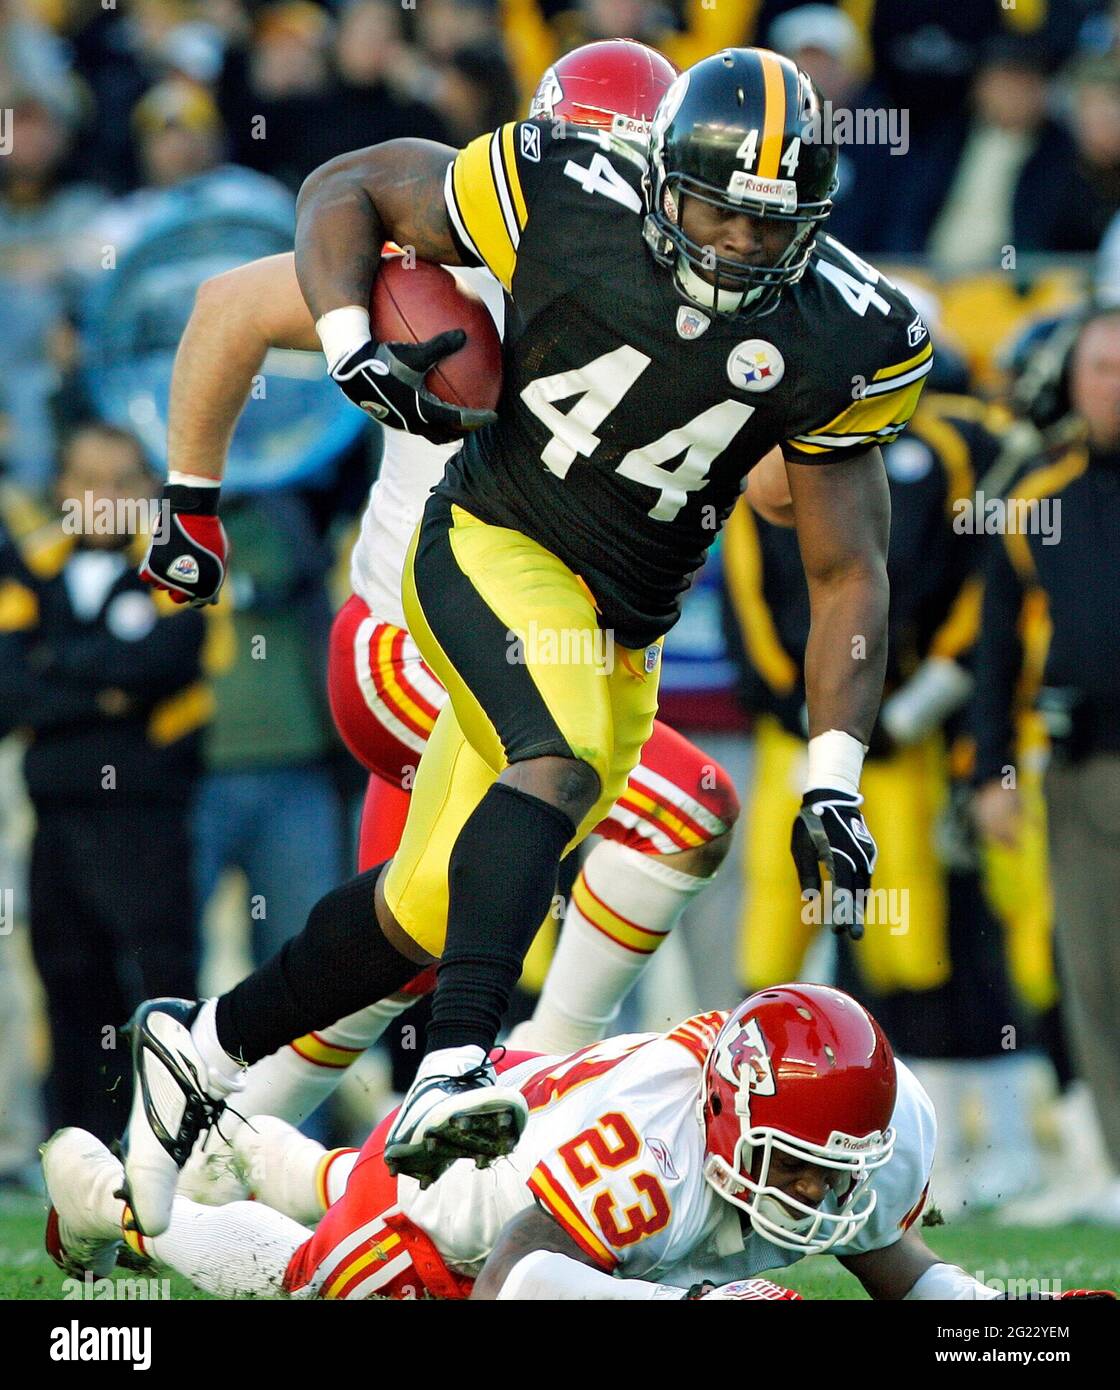 Pittsburgh, USA. 15th Oct, 2006. Pittsburgh Steelers running back Najeh Davenport (44) steps over Kansas City Chiefs' Patrick Surtain on a 48-yard run in the second quarter, at Heinz Field in Pittsburgh, Pennsylvania, Sunday, October 15, 2006. (Photo by John Sleezer/The Kansas City Star/TNS/Sipa USA) Credit: Sipa USA/Alamy Live News Stock Photo